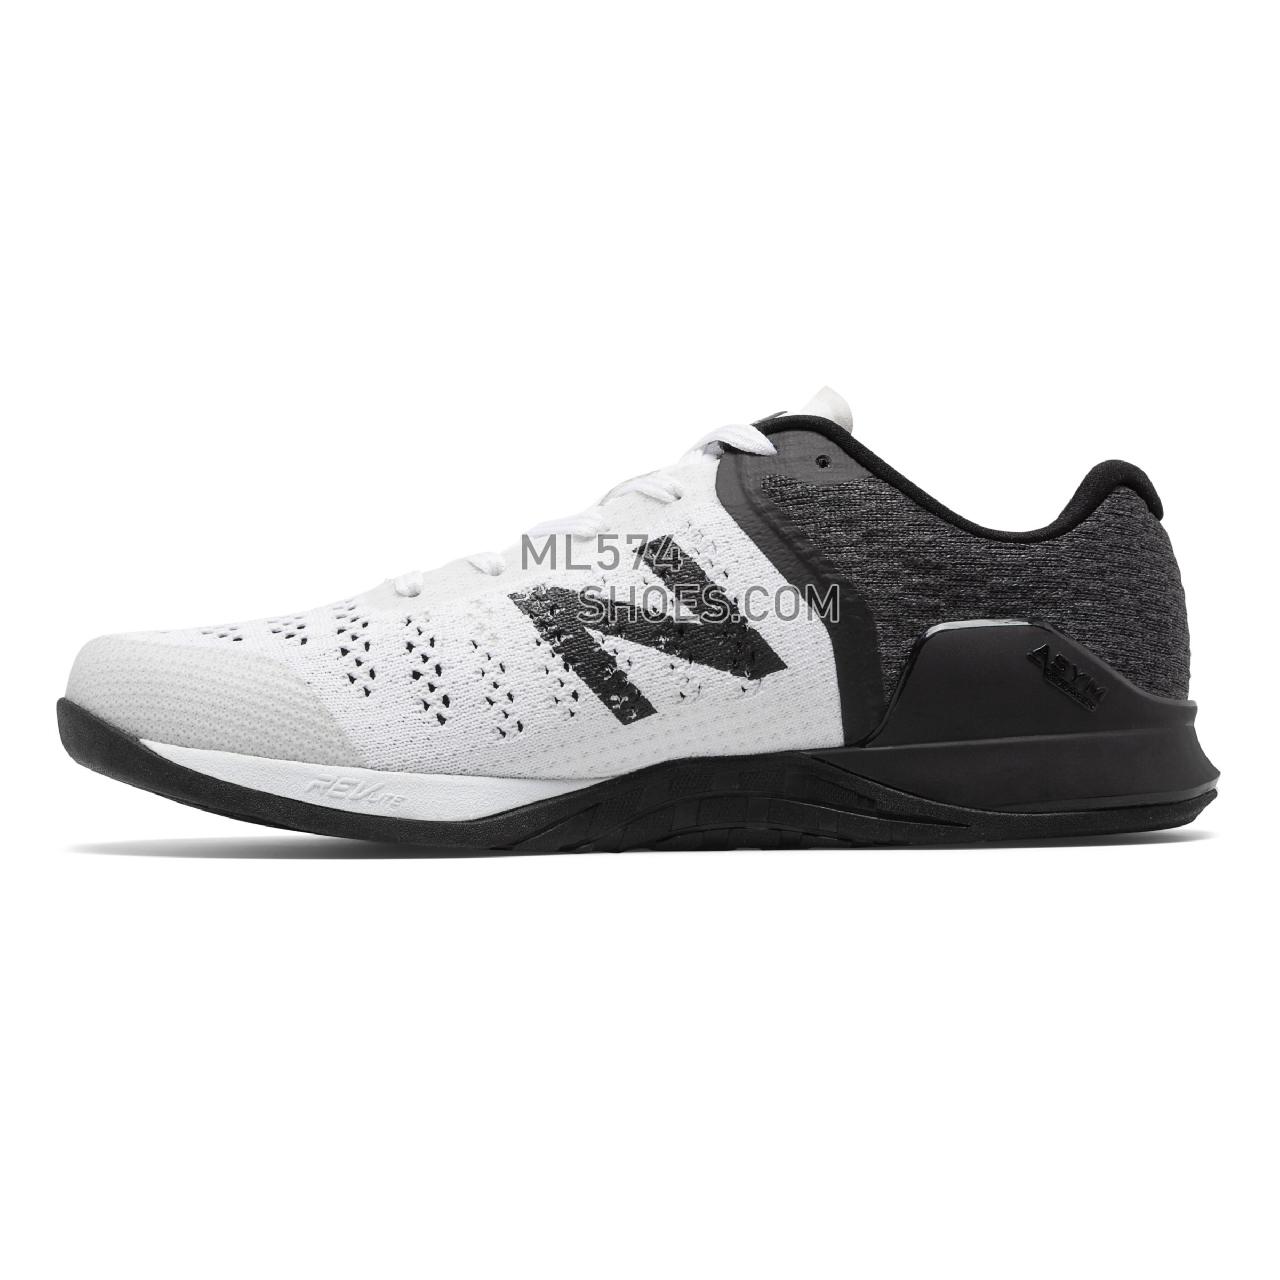 New Balance Minimus Prevail - Men's Cross-Training - White with Black and Energy Red - MXMPLW1